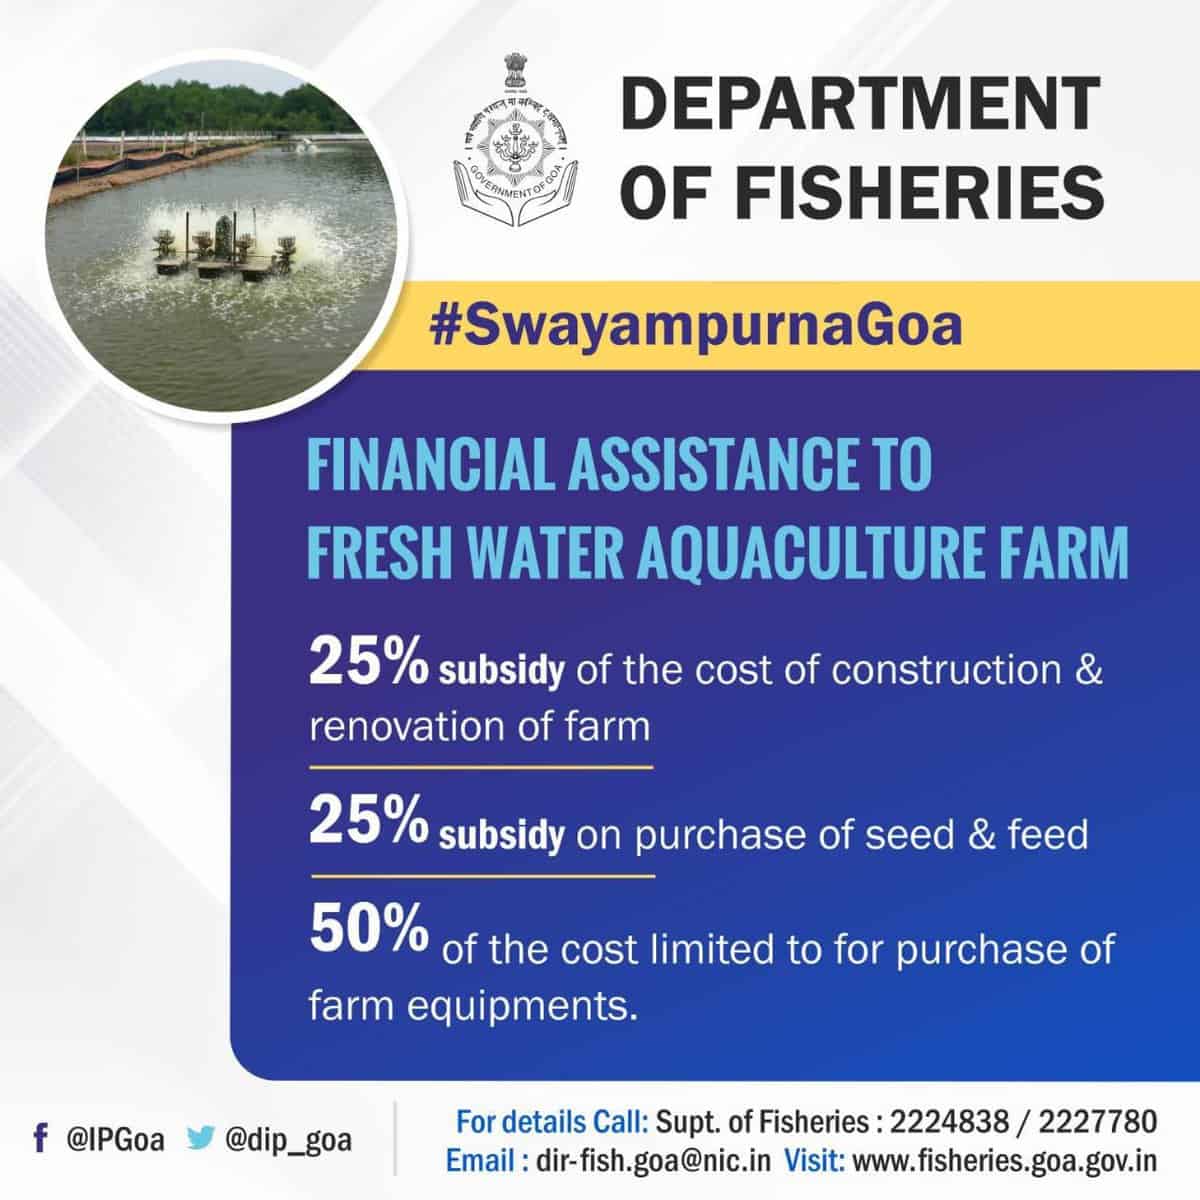 Financial assistance available to freshwater aquaculture farm